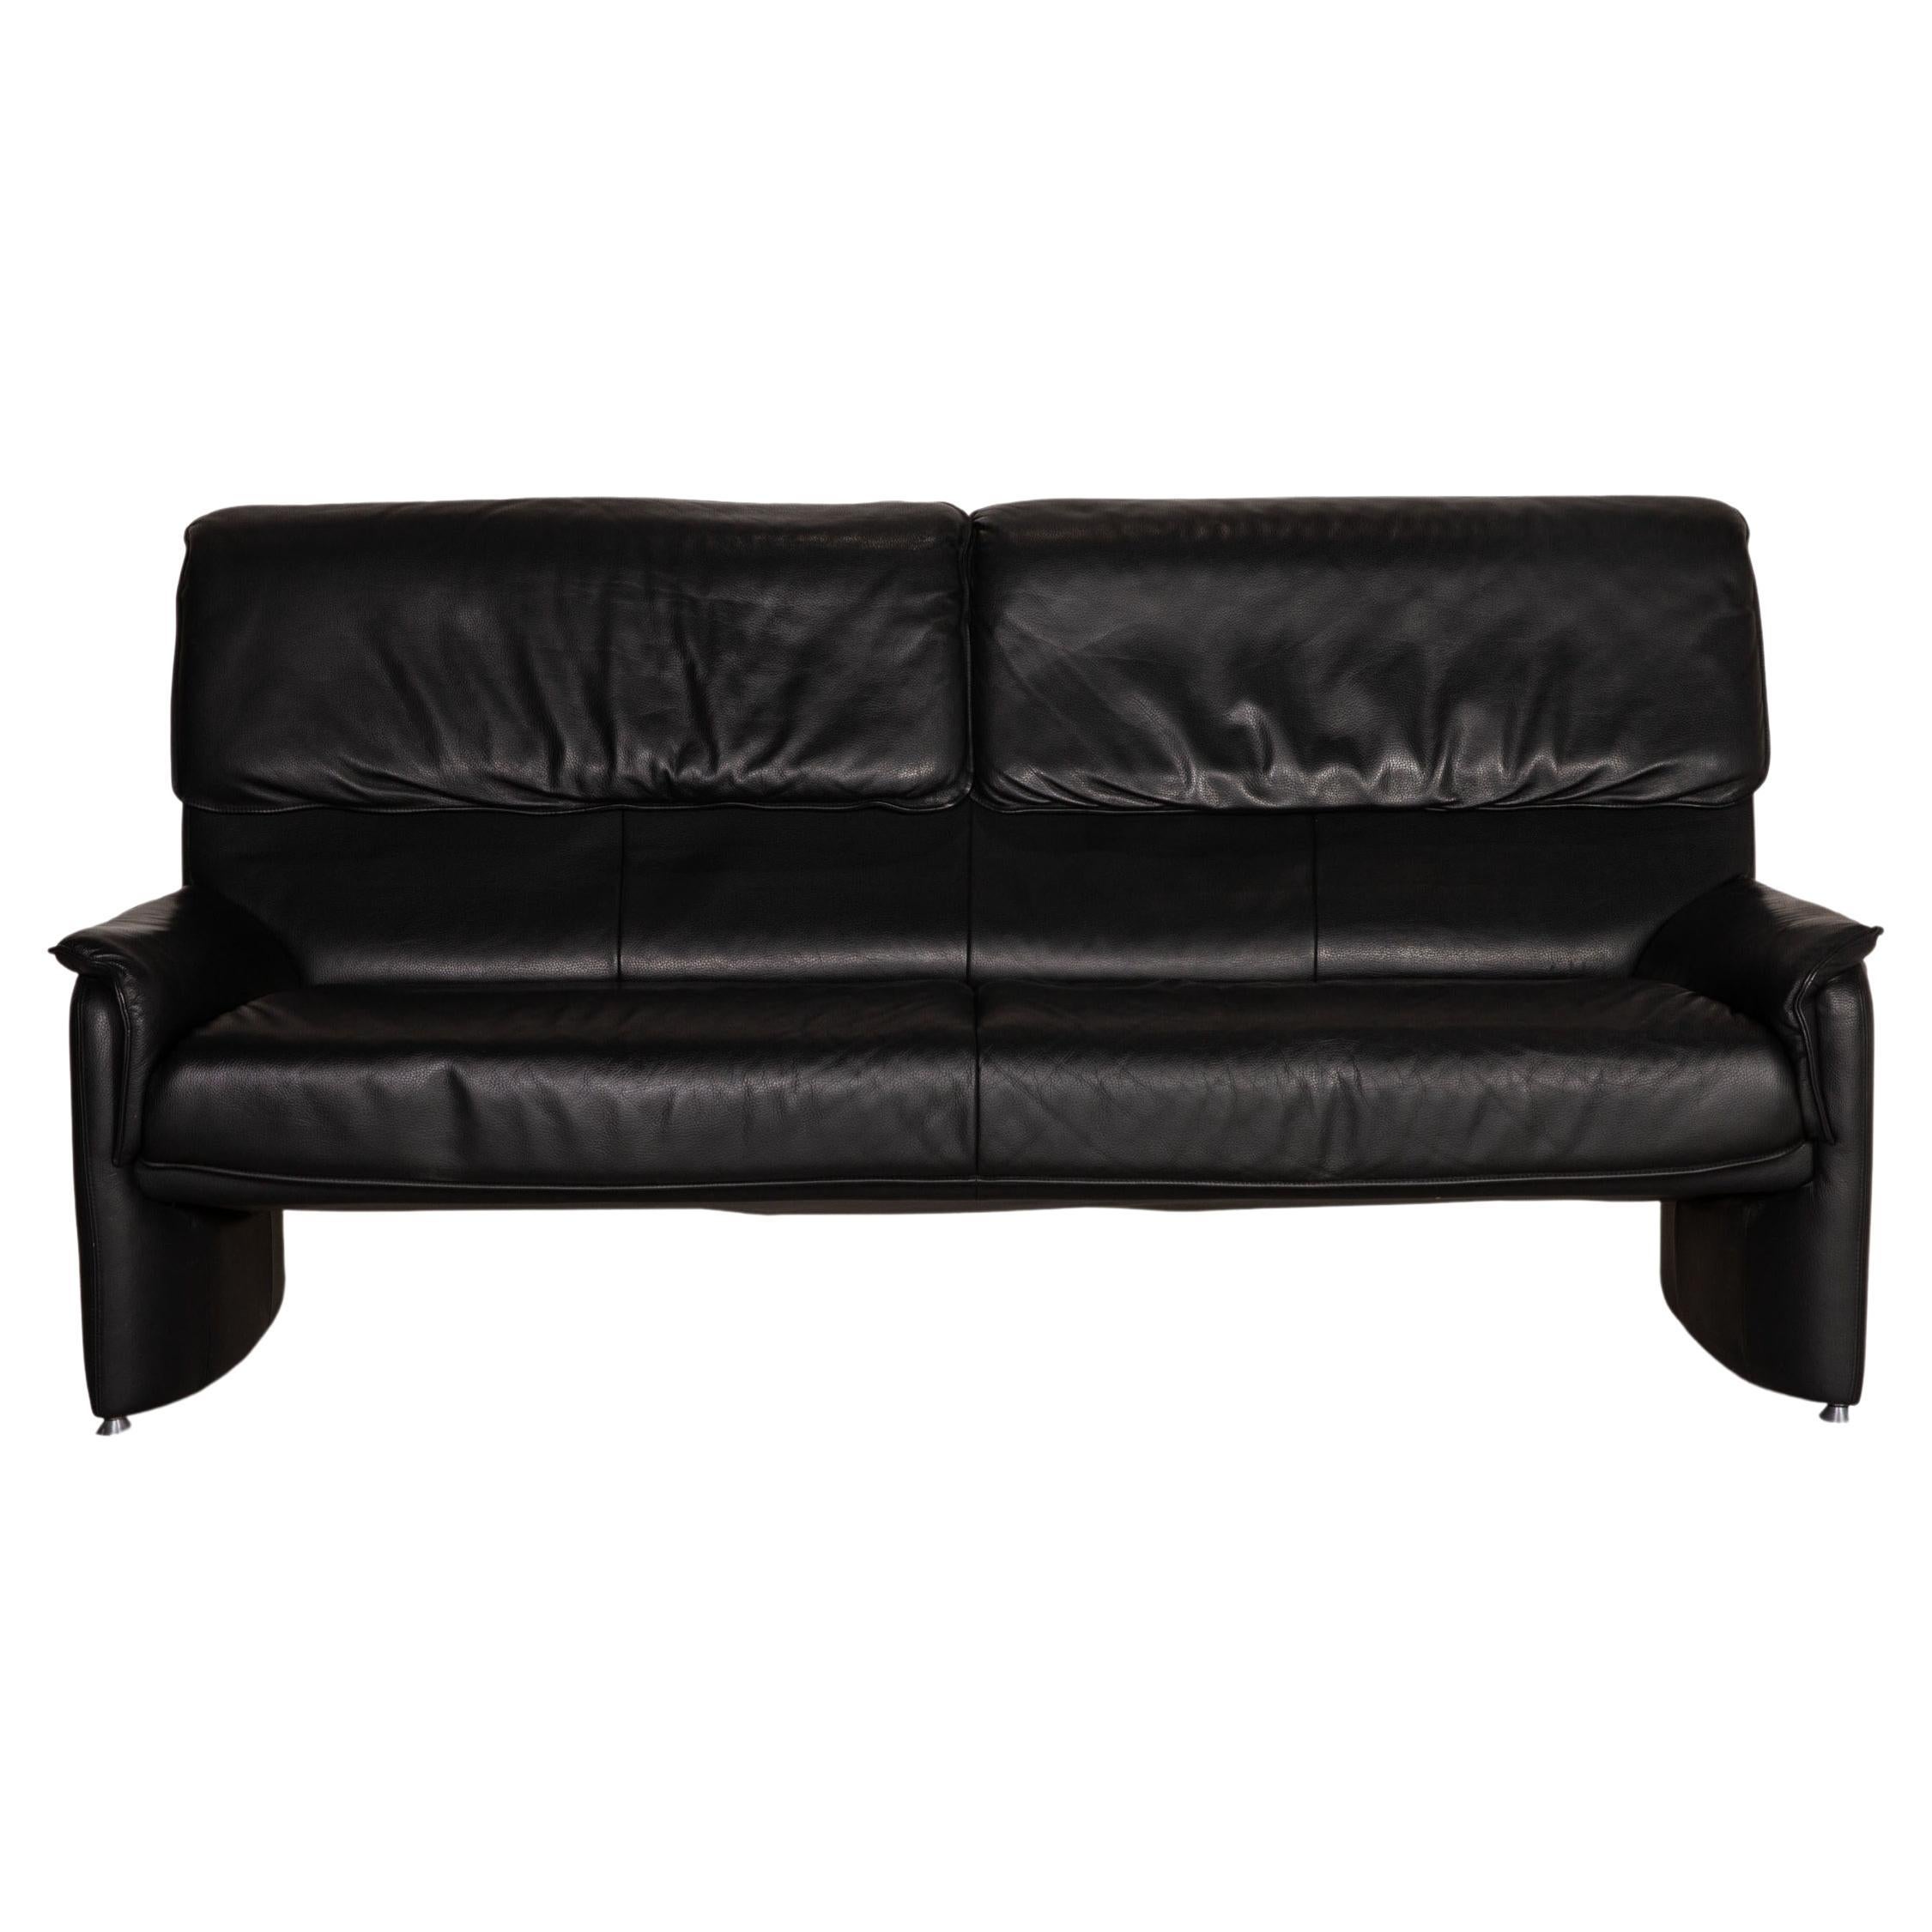 Laauser Camaro Leather Sofa Black Two Seater Couch For Sale